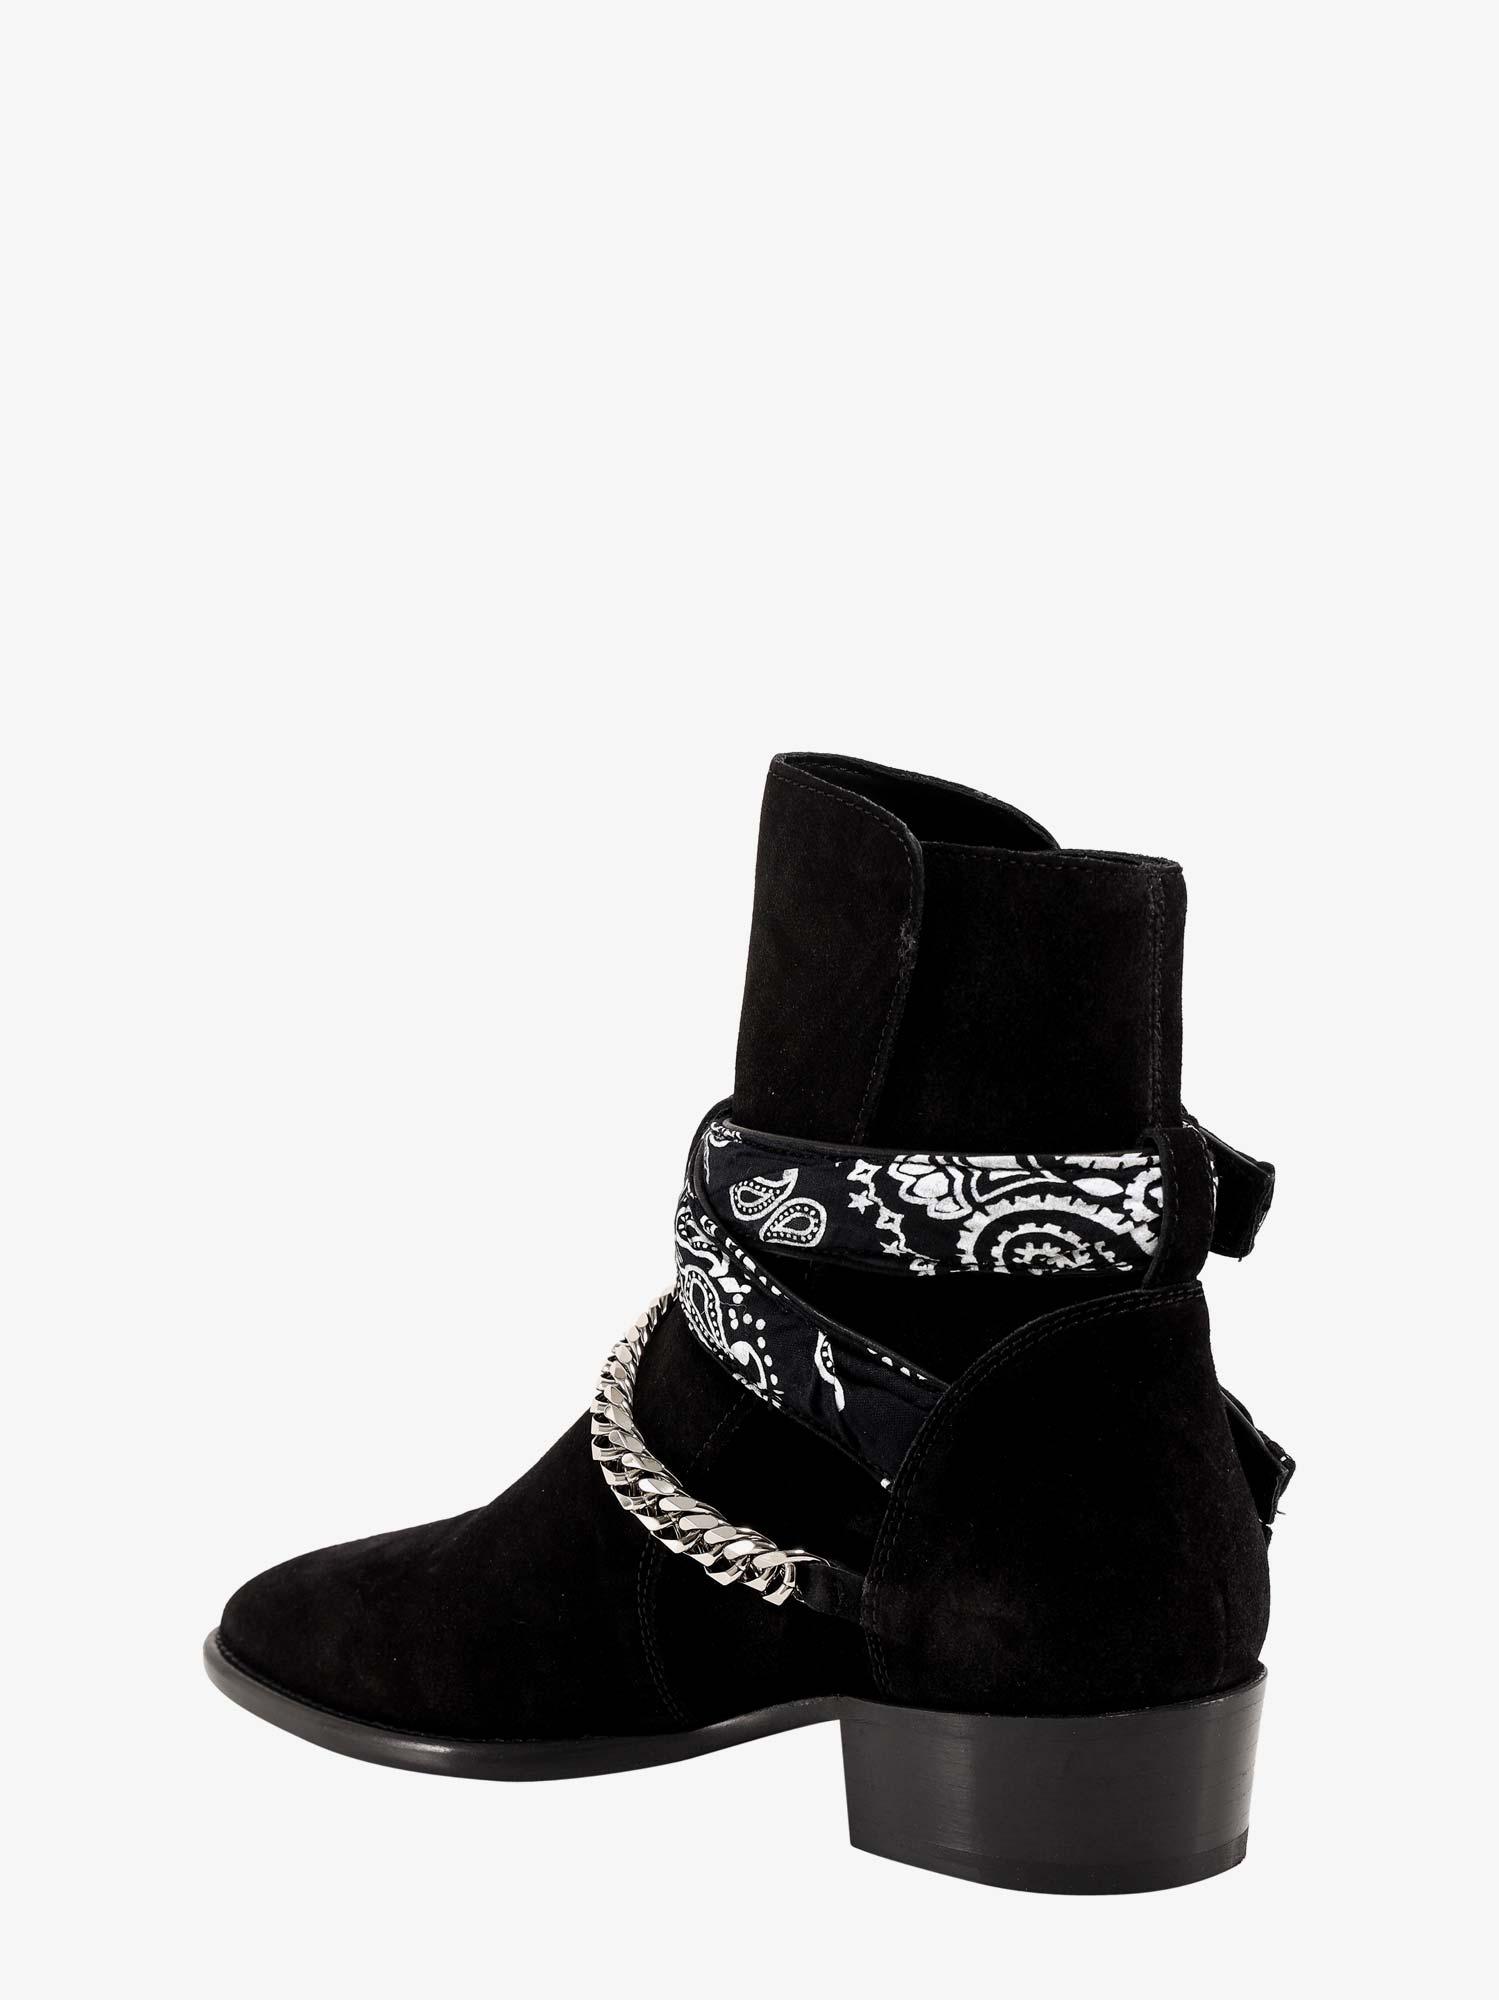 Amiri Suede Boots in Black for Men - Lyst